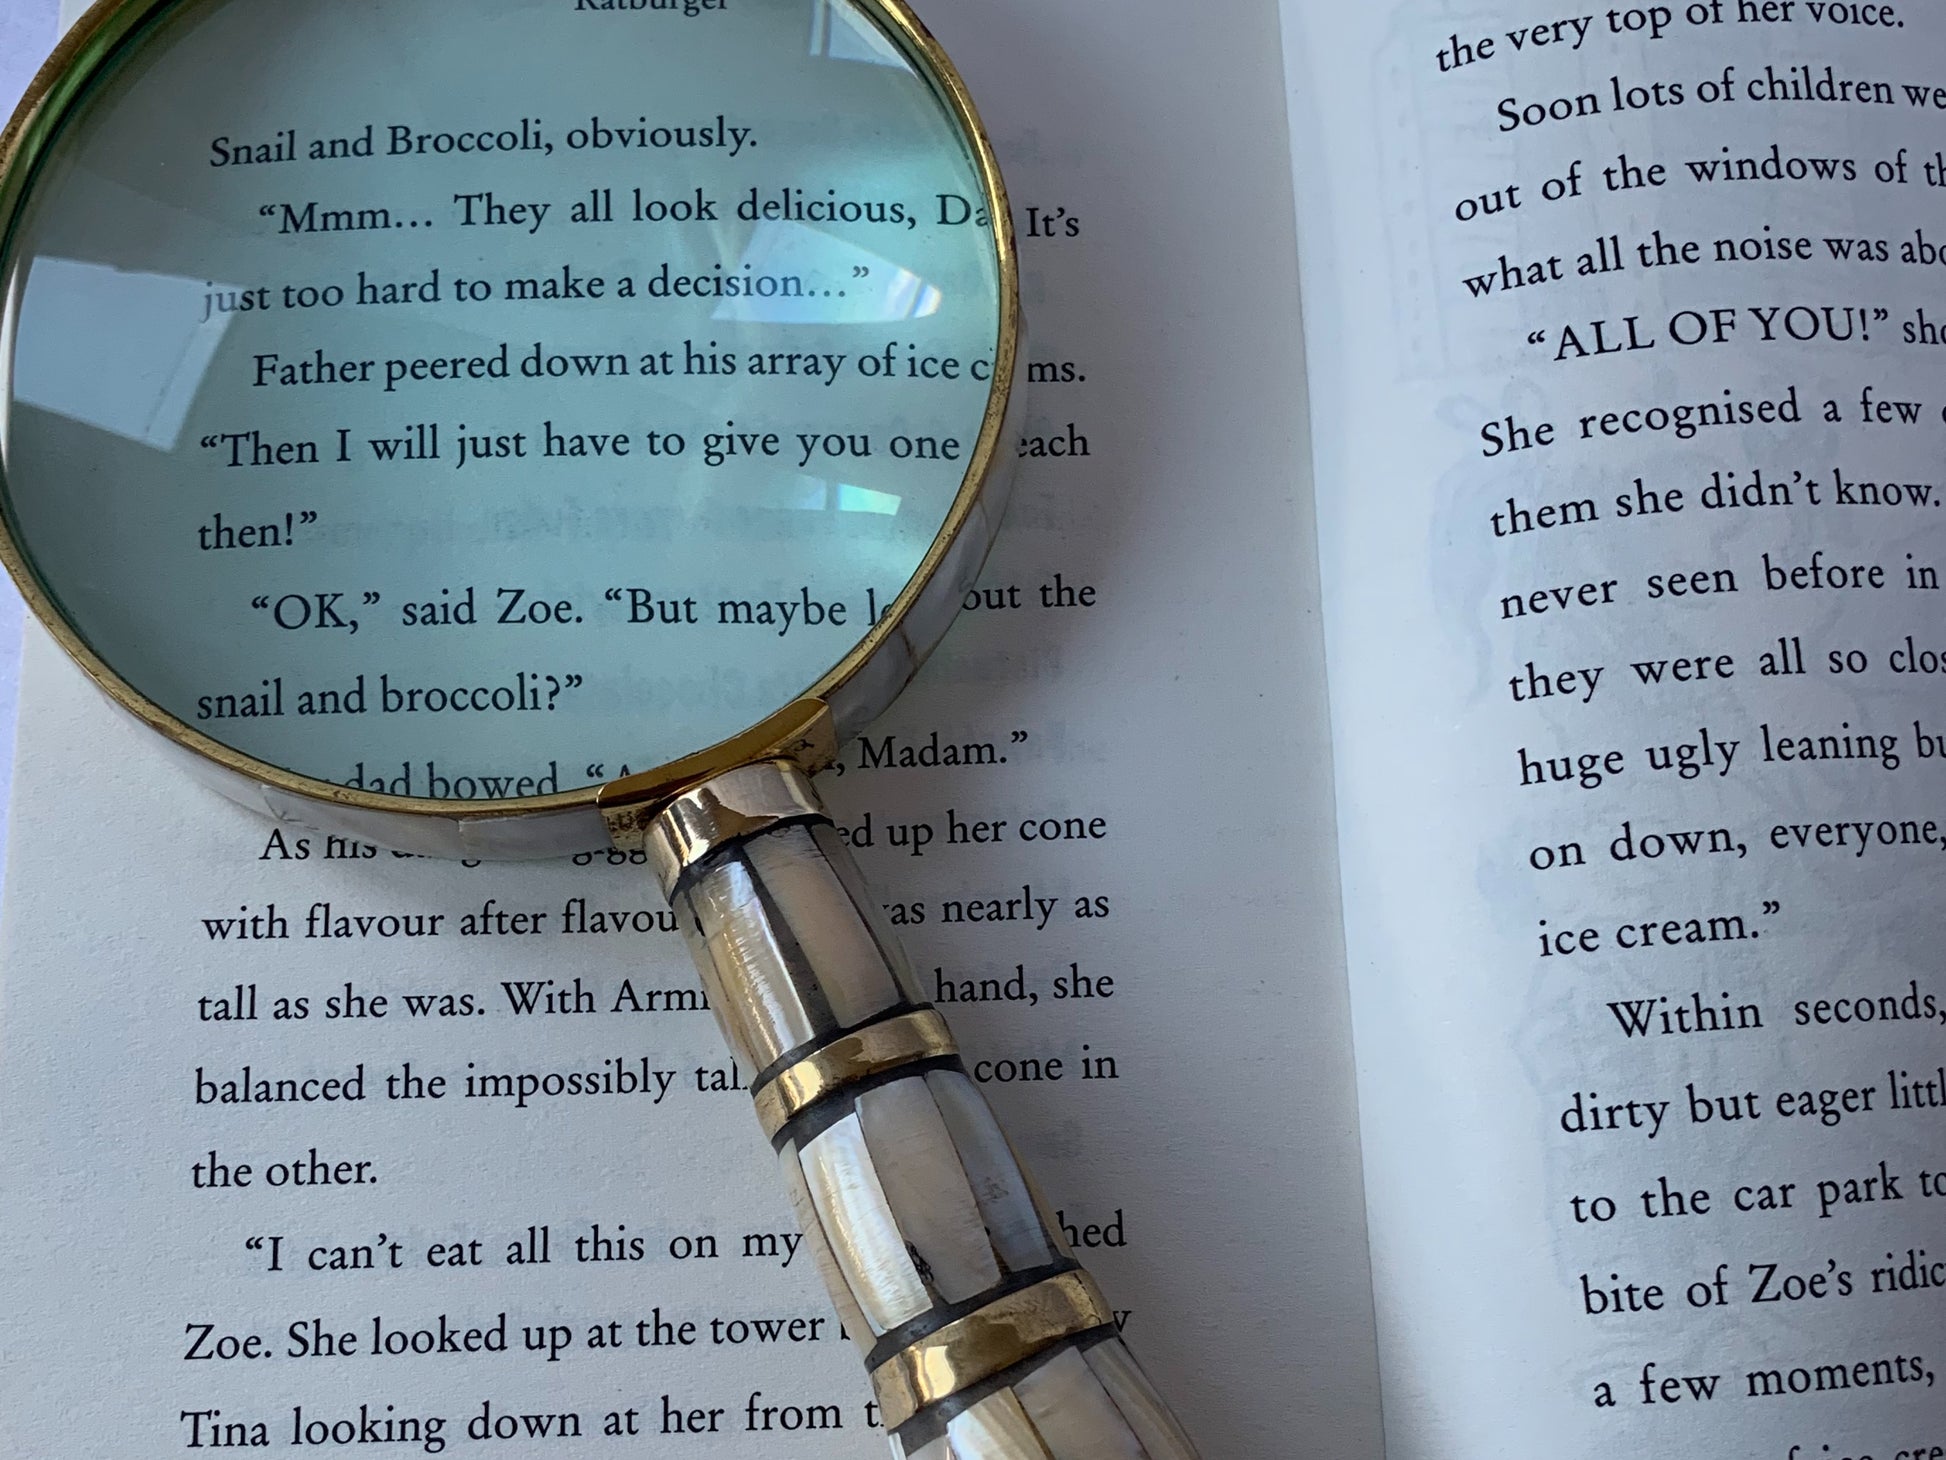 Marble magnifier on book